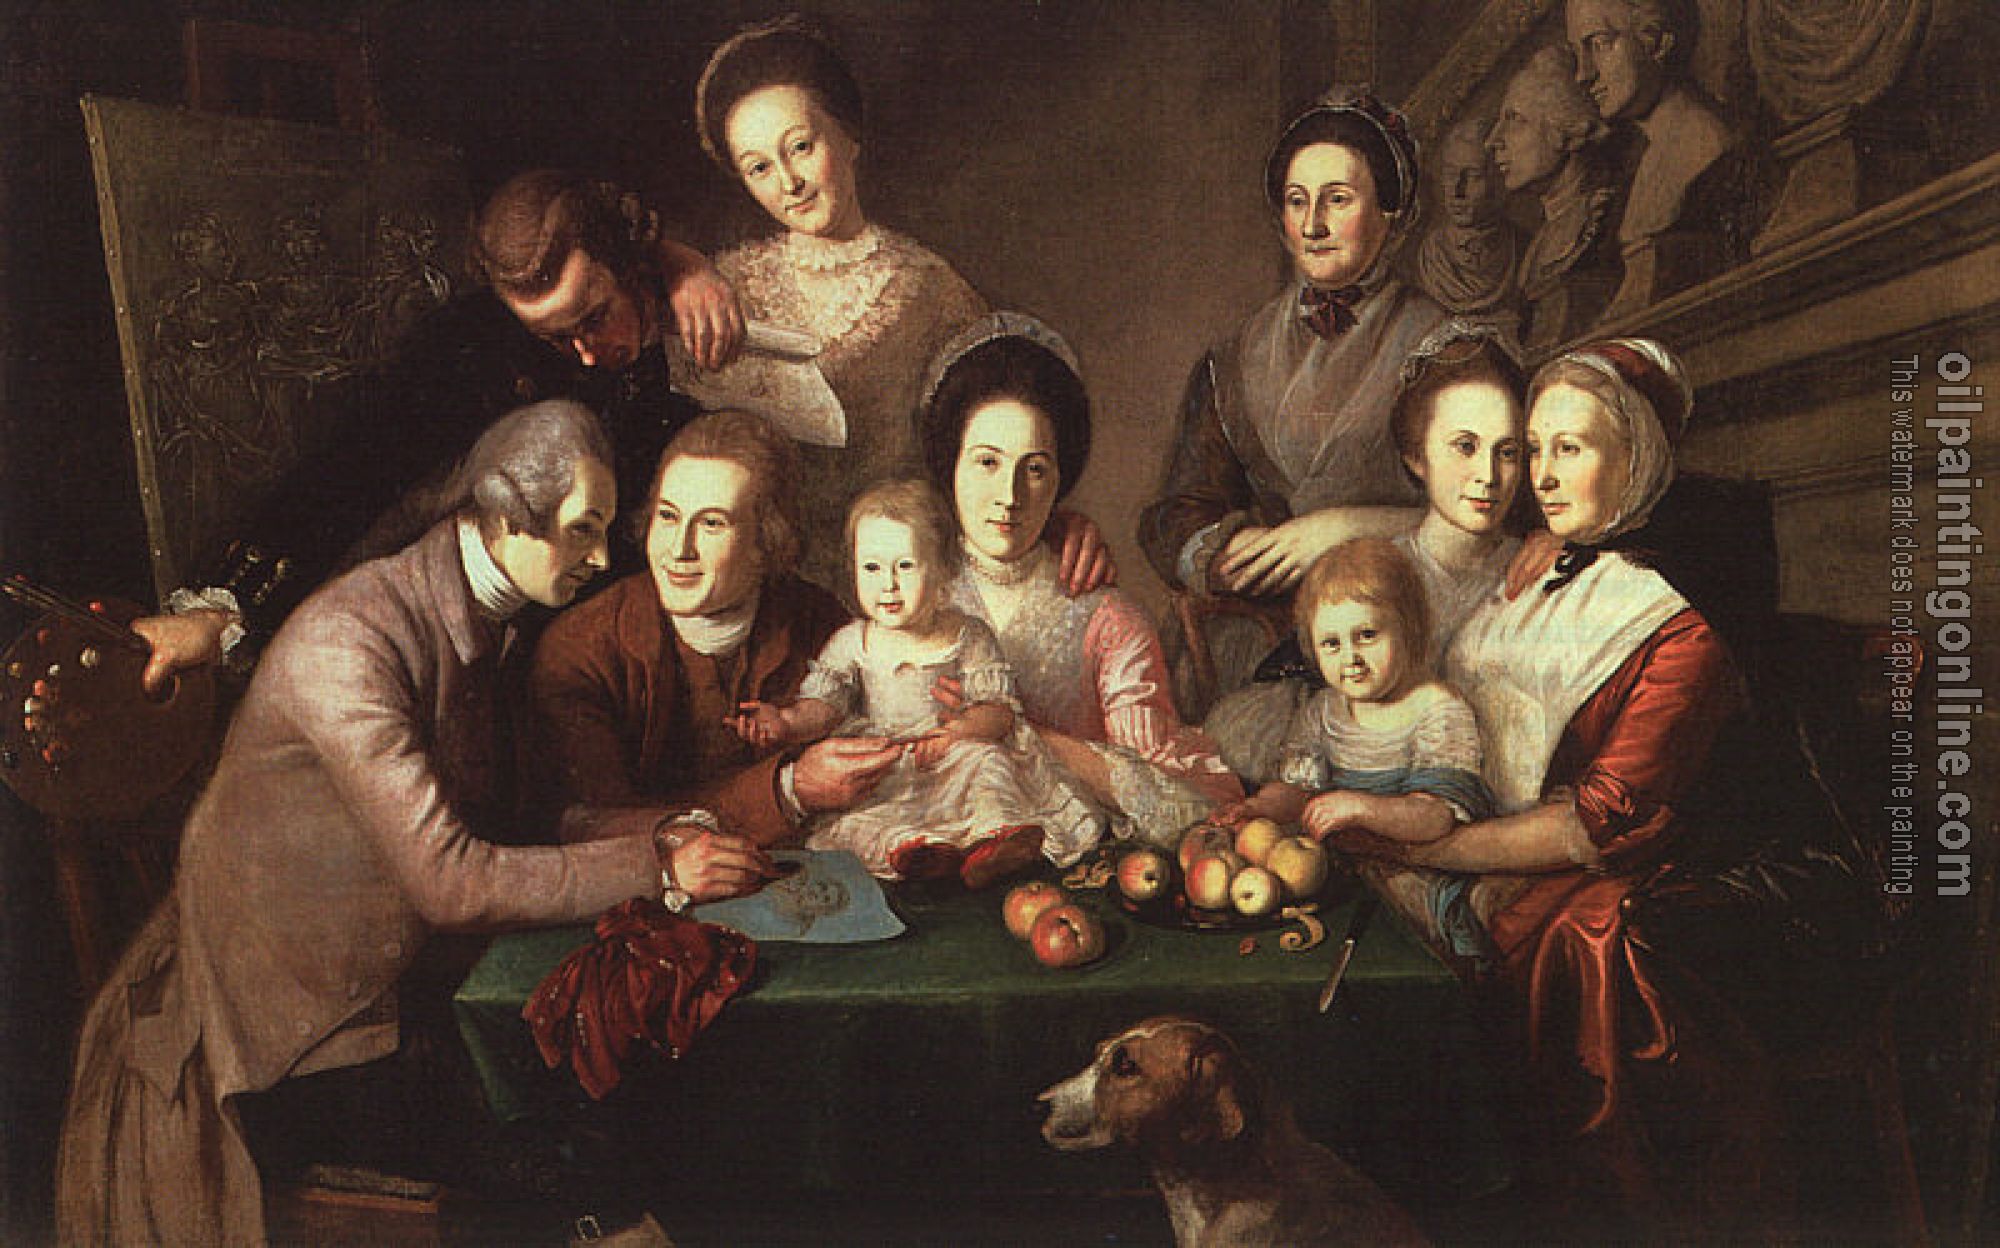 Peale, Charles Willson - The Peale Family